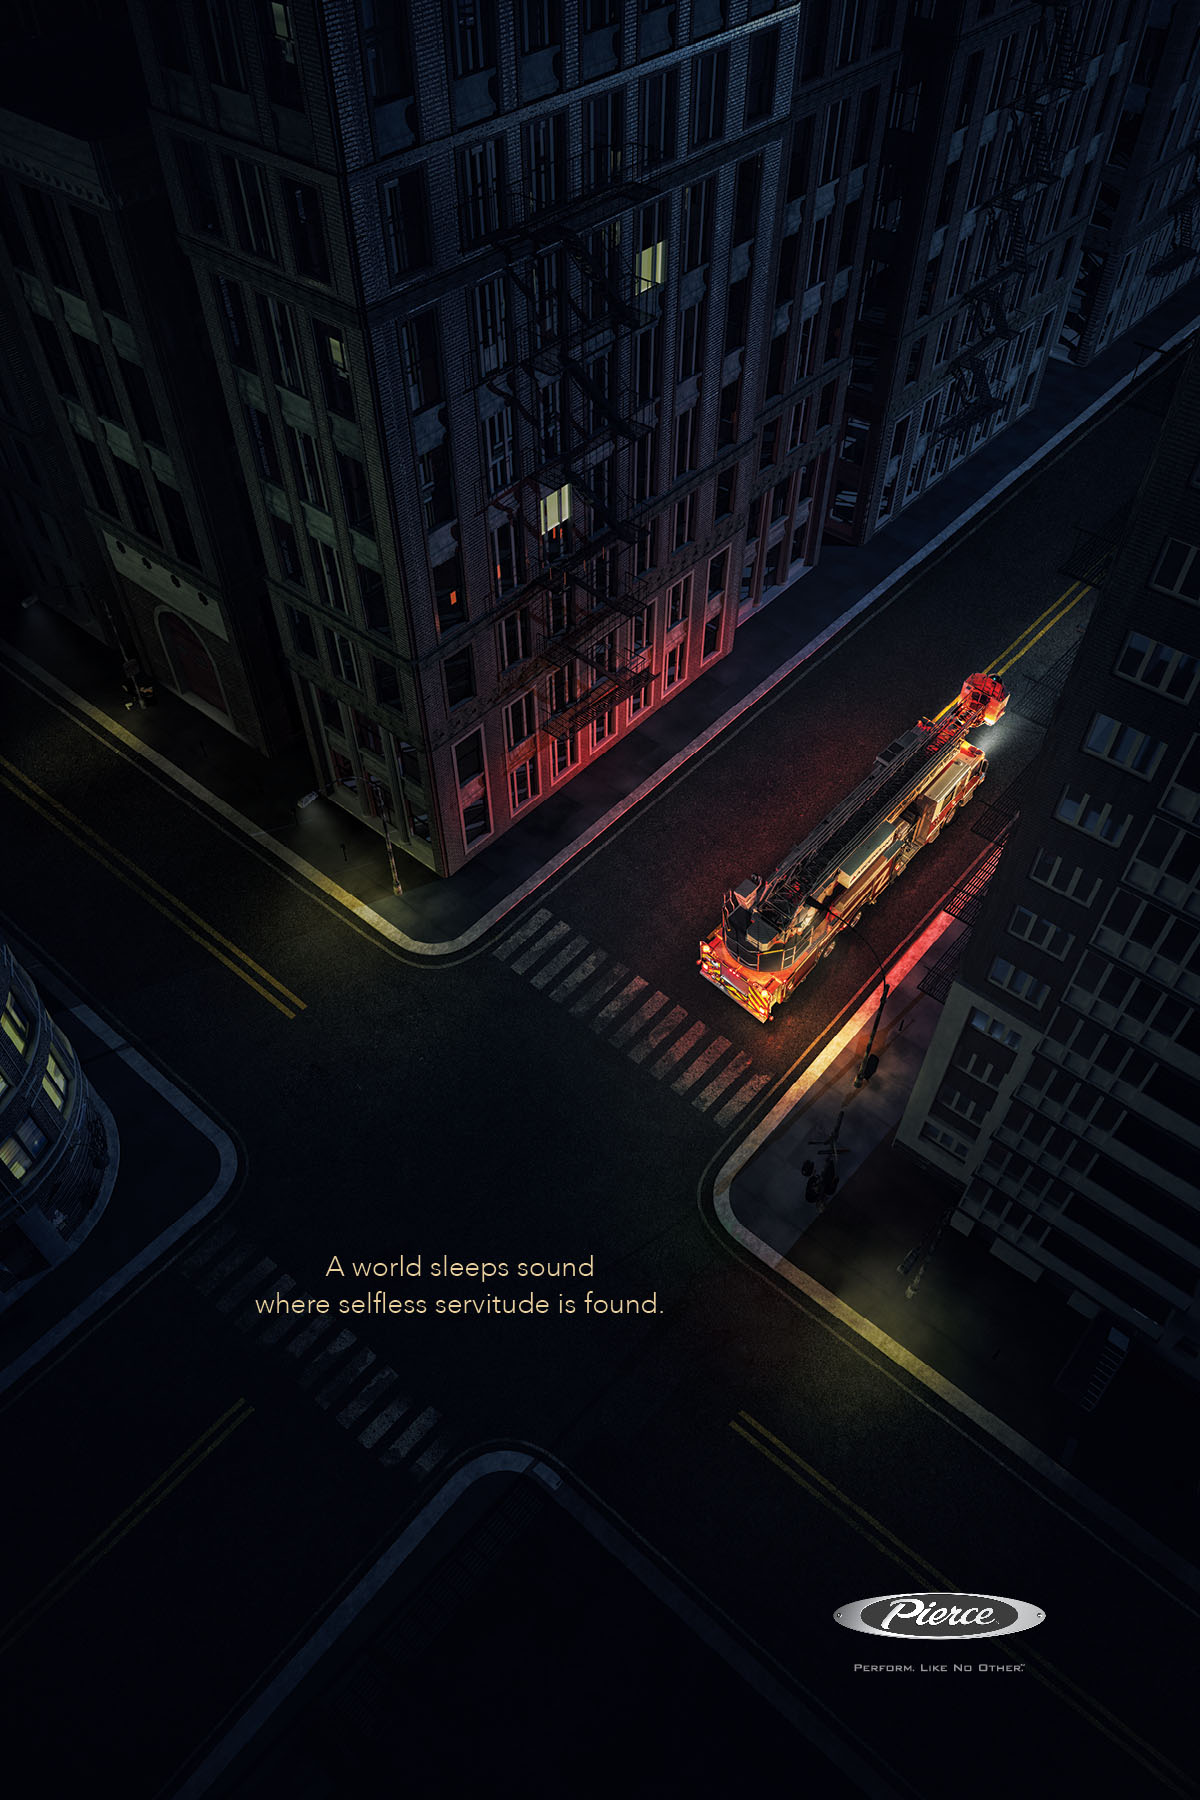 an overhead view of a firetruck driving through a city at night surrounded by tall buildings